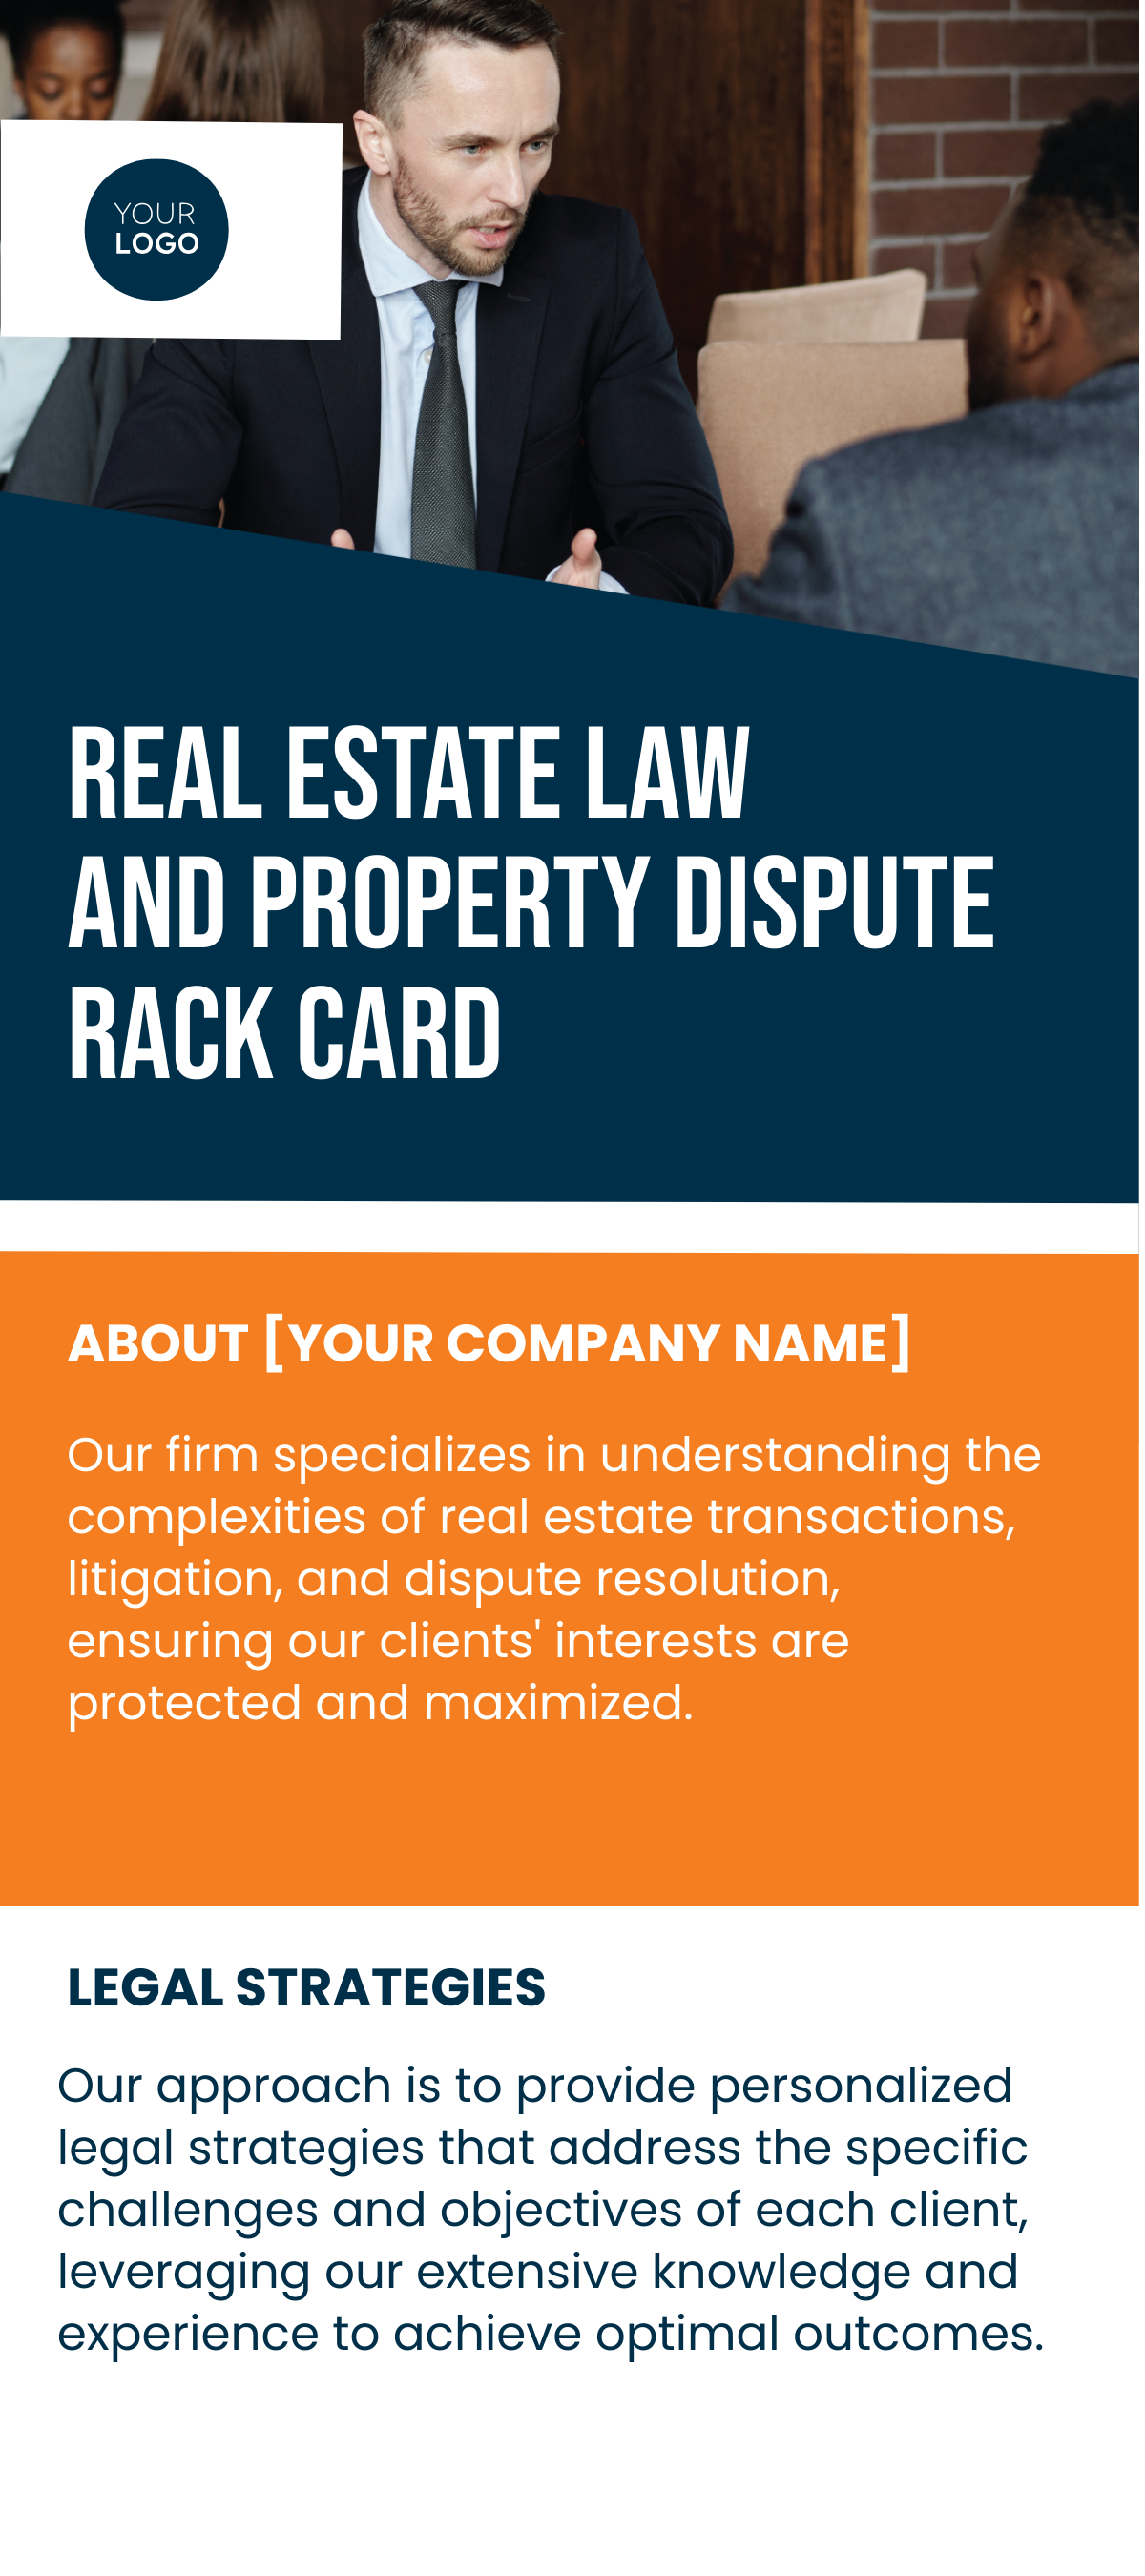 Real Estate Law and Property Dispute Rack Card Template